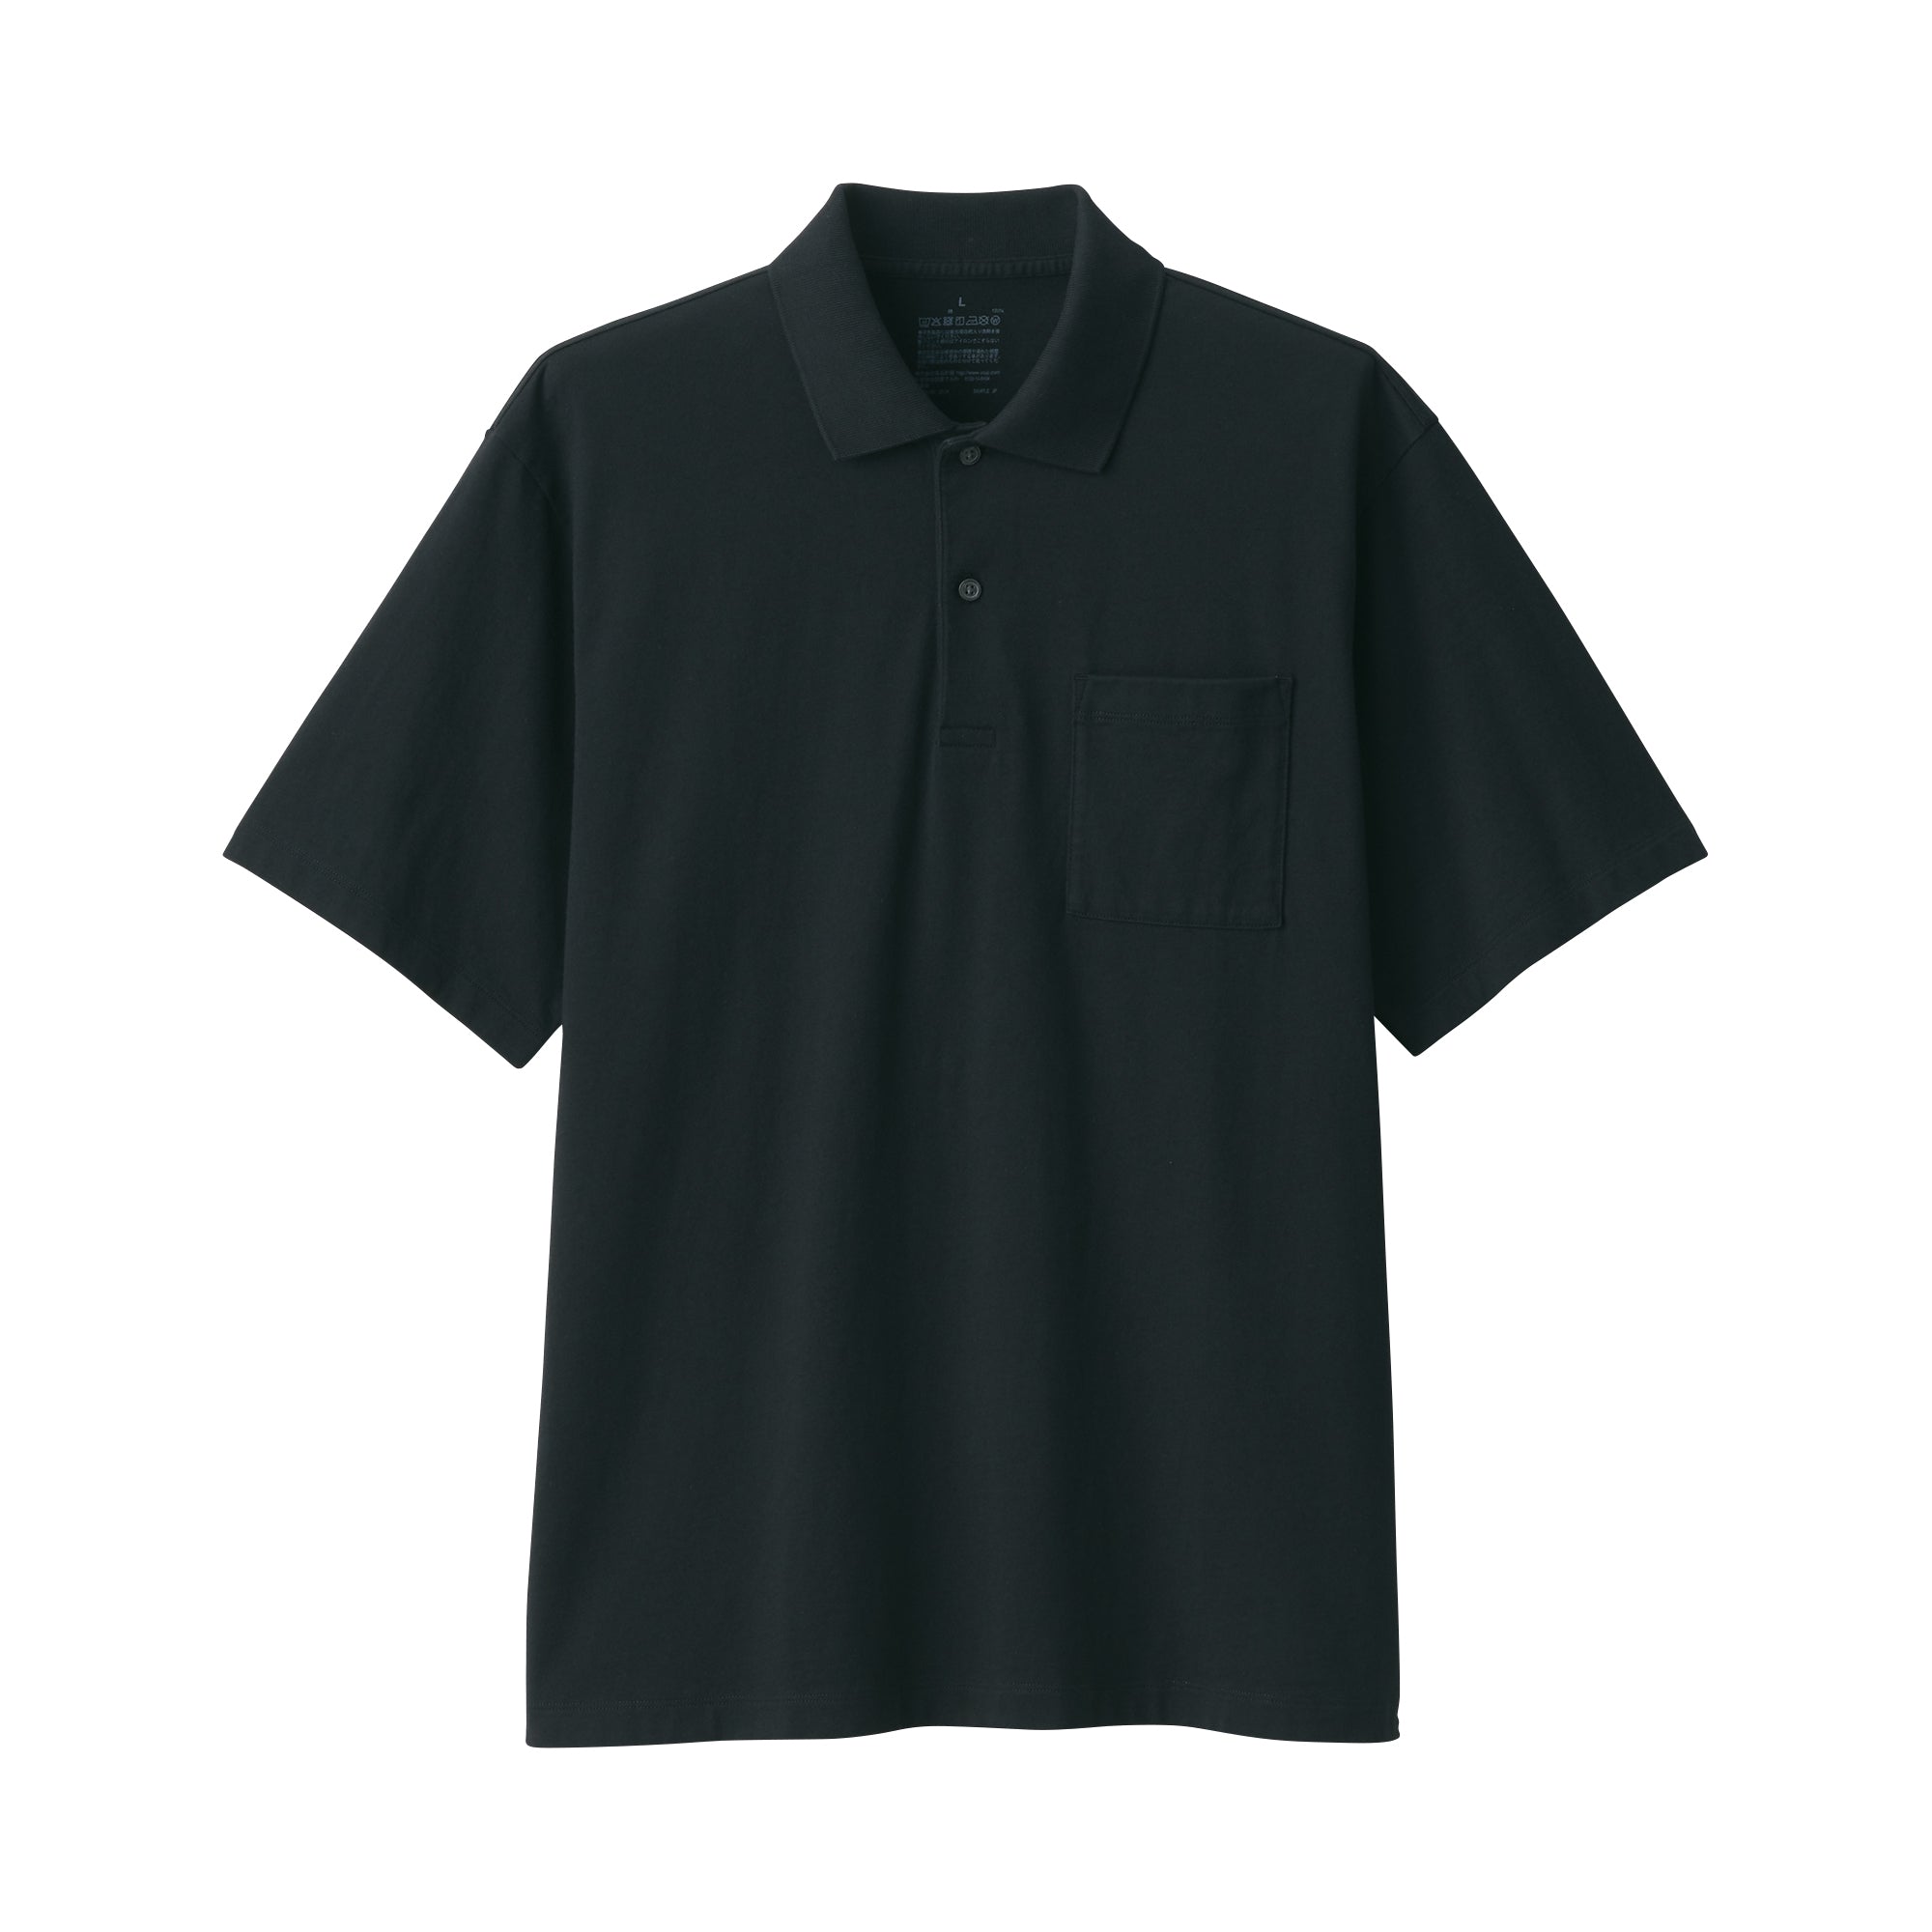 Men's Washed Jersey Short Sleeve Polo Shirt